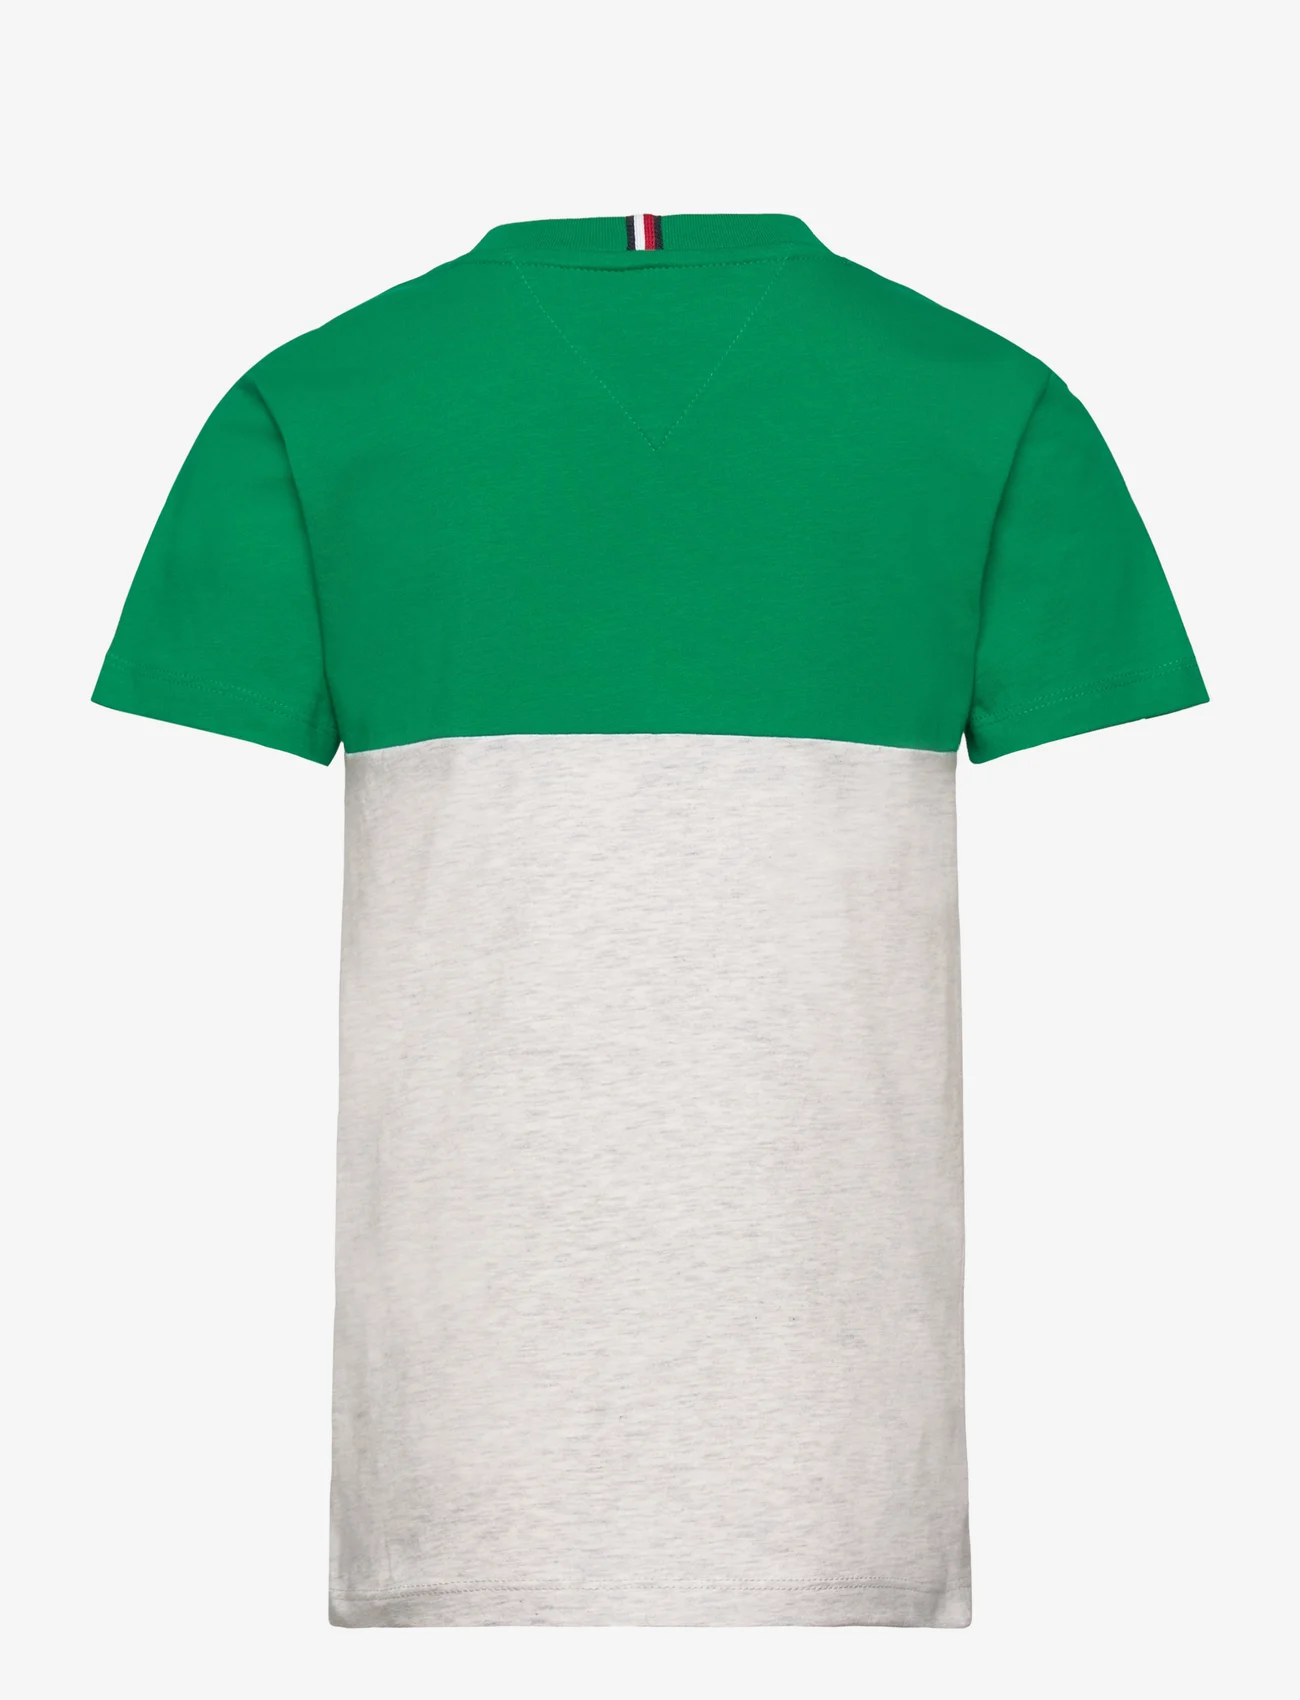 Tommy Hilfiger - ESSENTIAL COLORBLOCK TEE S/S - lyhythihaiset t-paidat - olympic green/light grey melange - 1